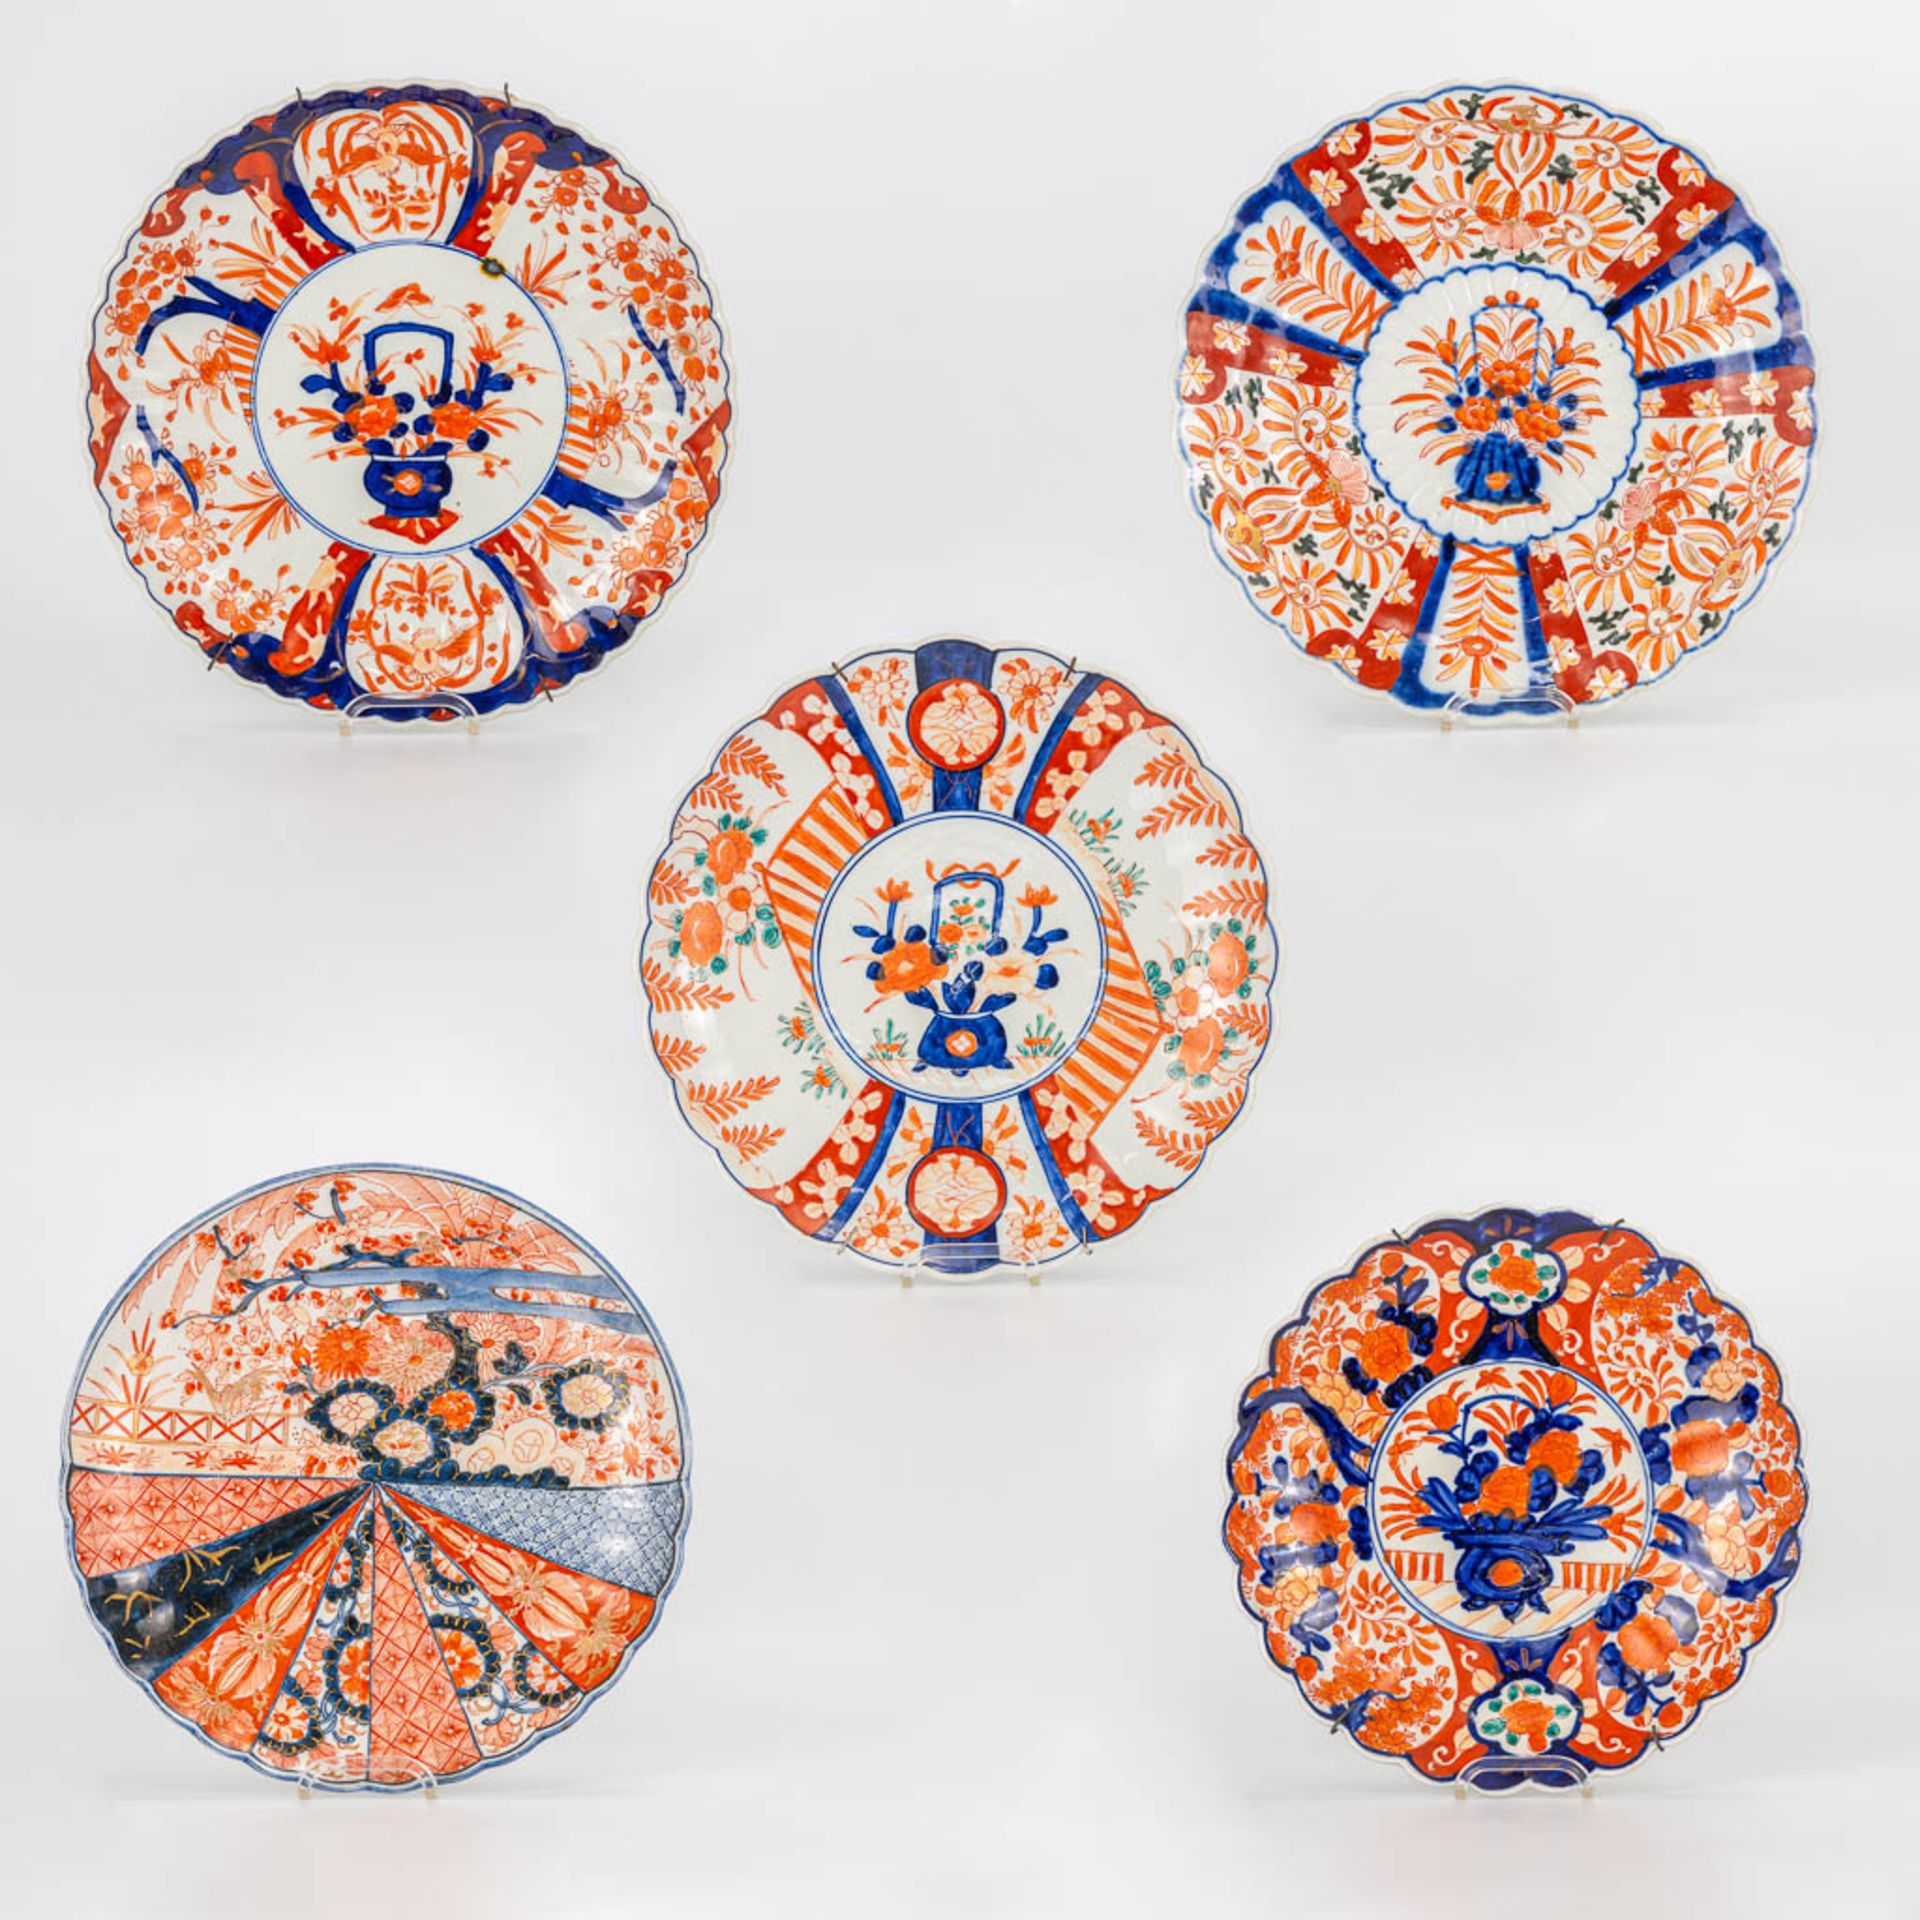 A collection of 5 Imari display plates made of Japanese porcelain. (4,5 x 30 cm)